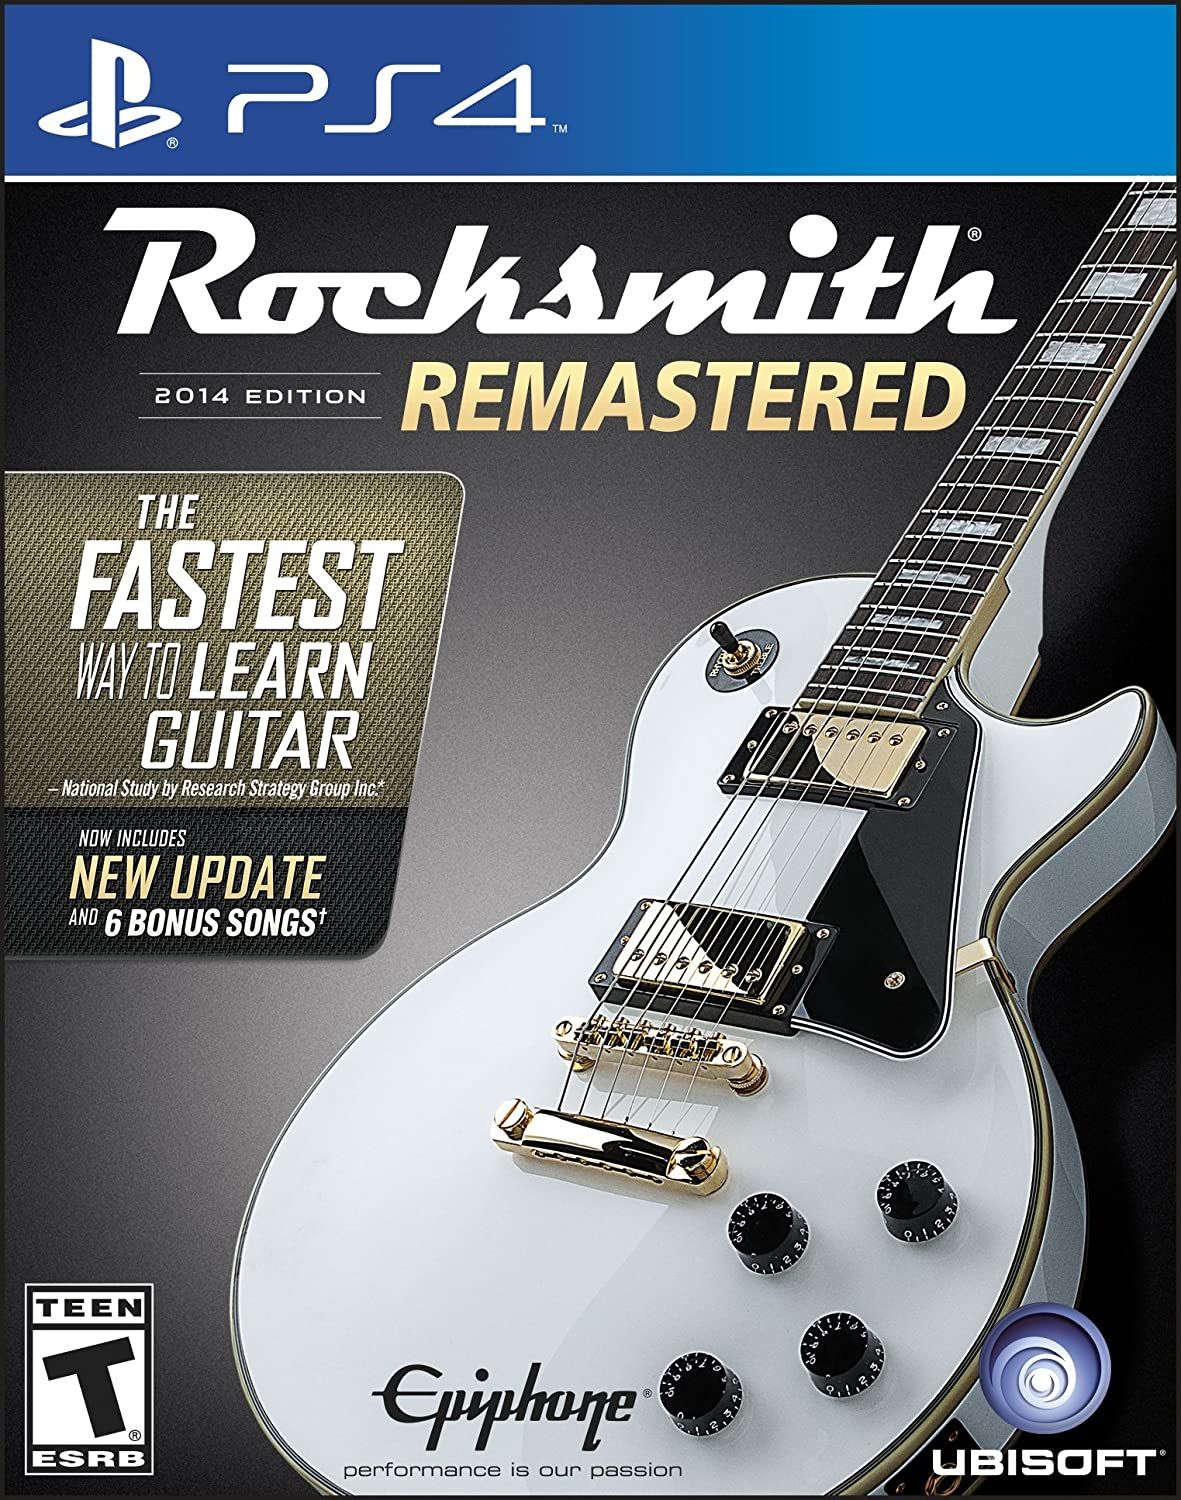 Rocksmith best educational video games